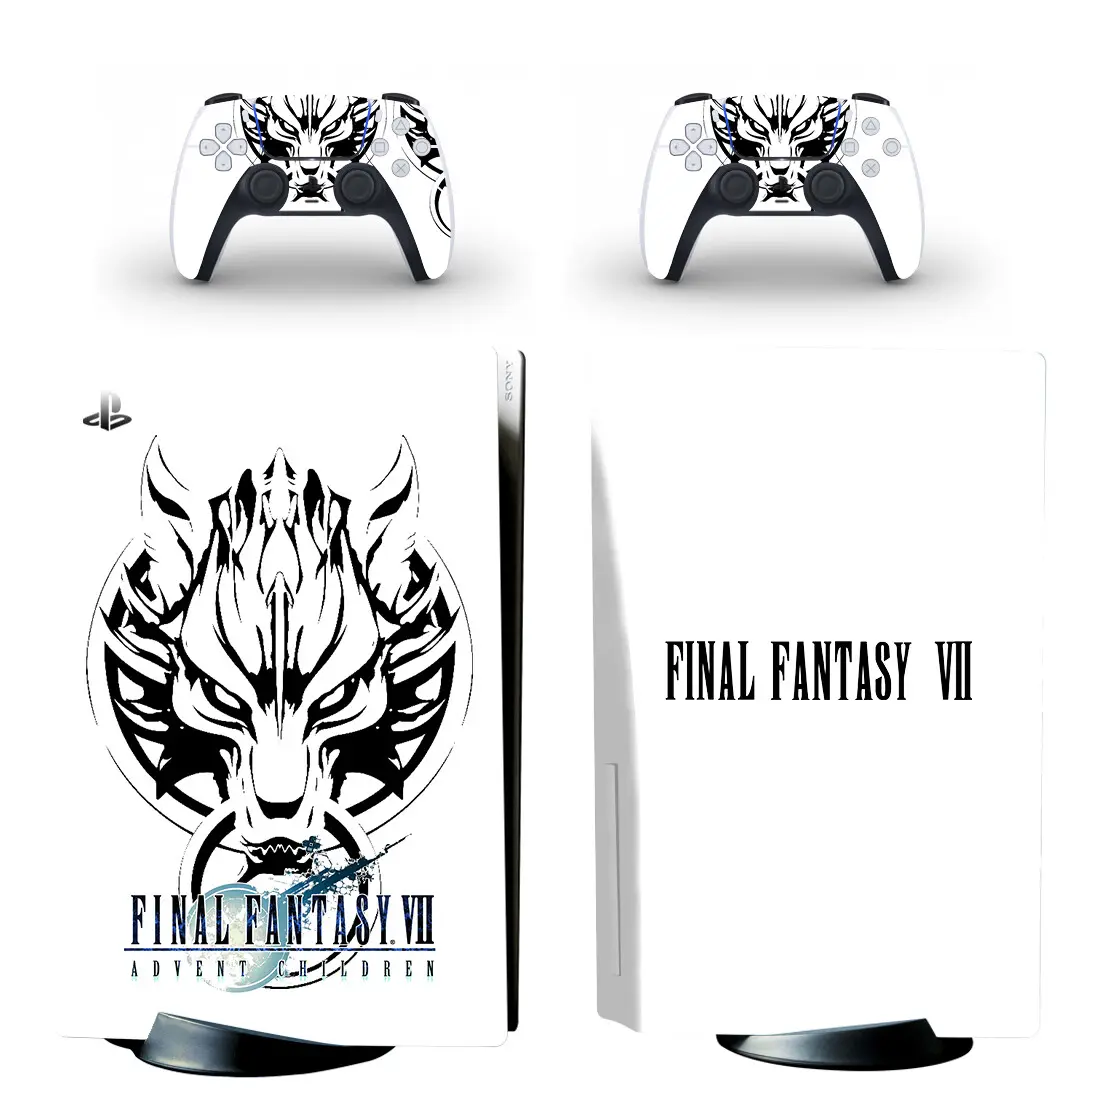 Classic Game Skin Sticker Decal Cover Case Voor Ps 5 Met Disc Drive Console En PS5 2 Controllers Vinyl Skin